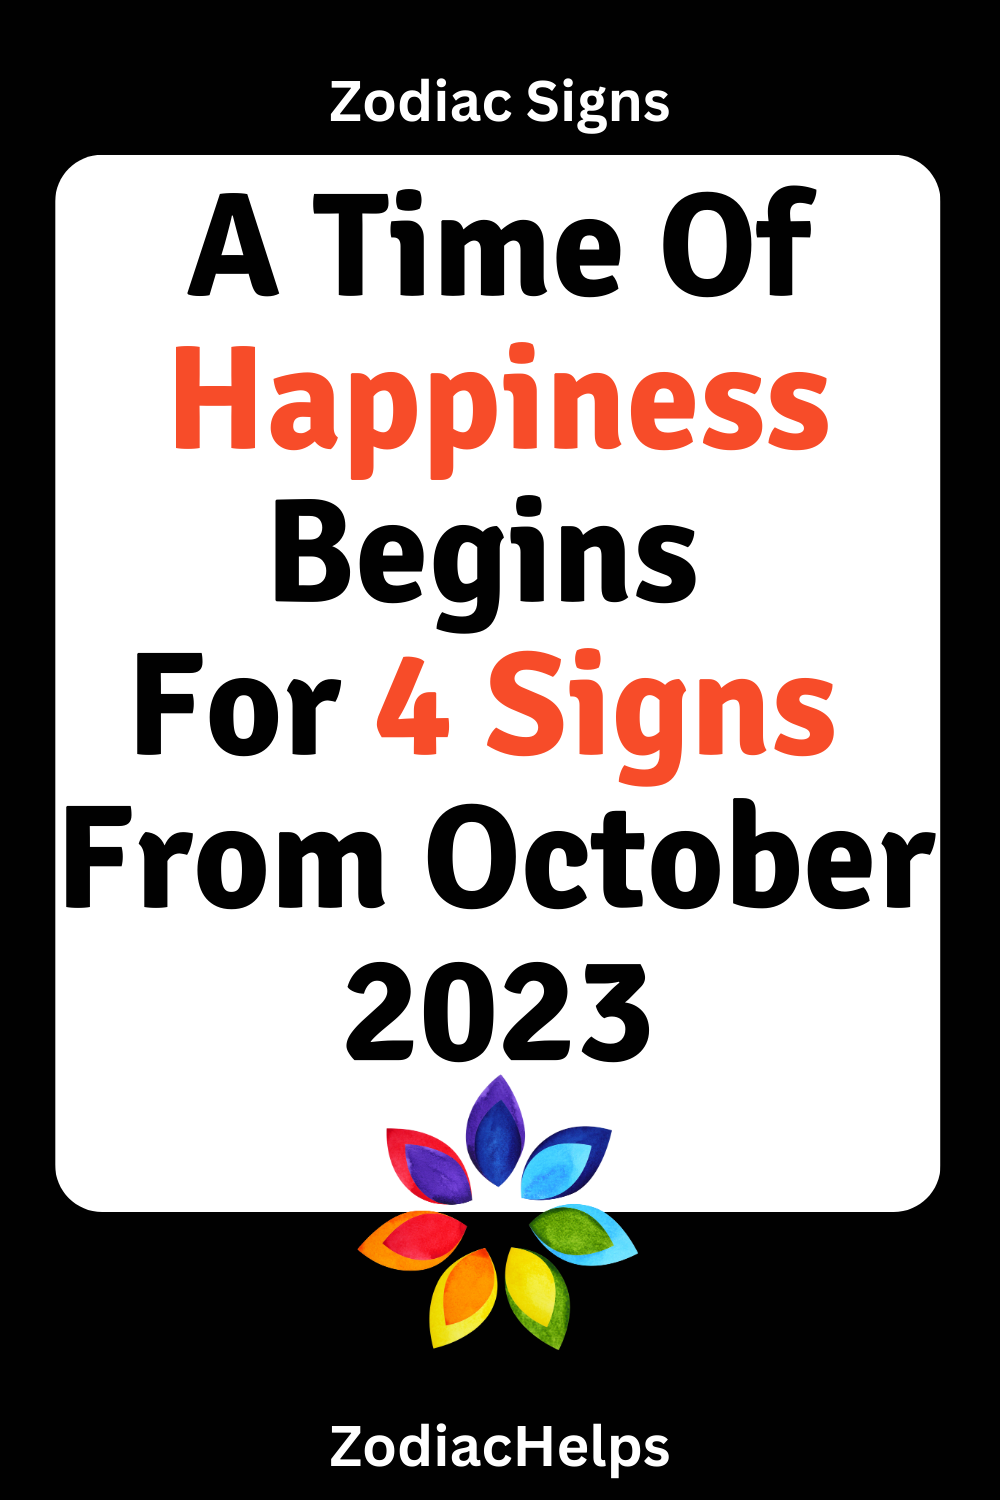 A Time Of Happiness Begins For 4 Signs From October 2023